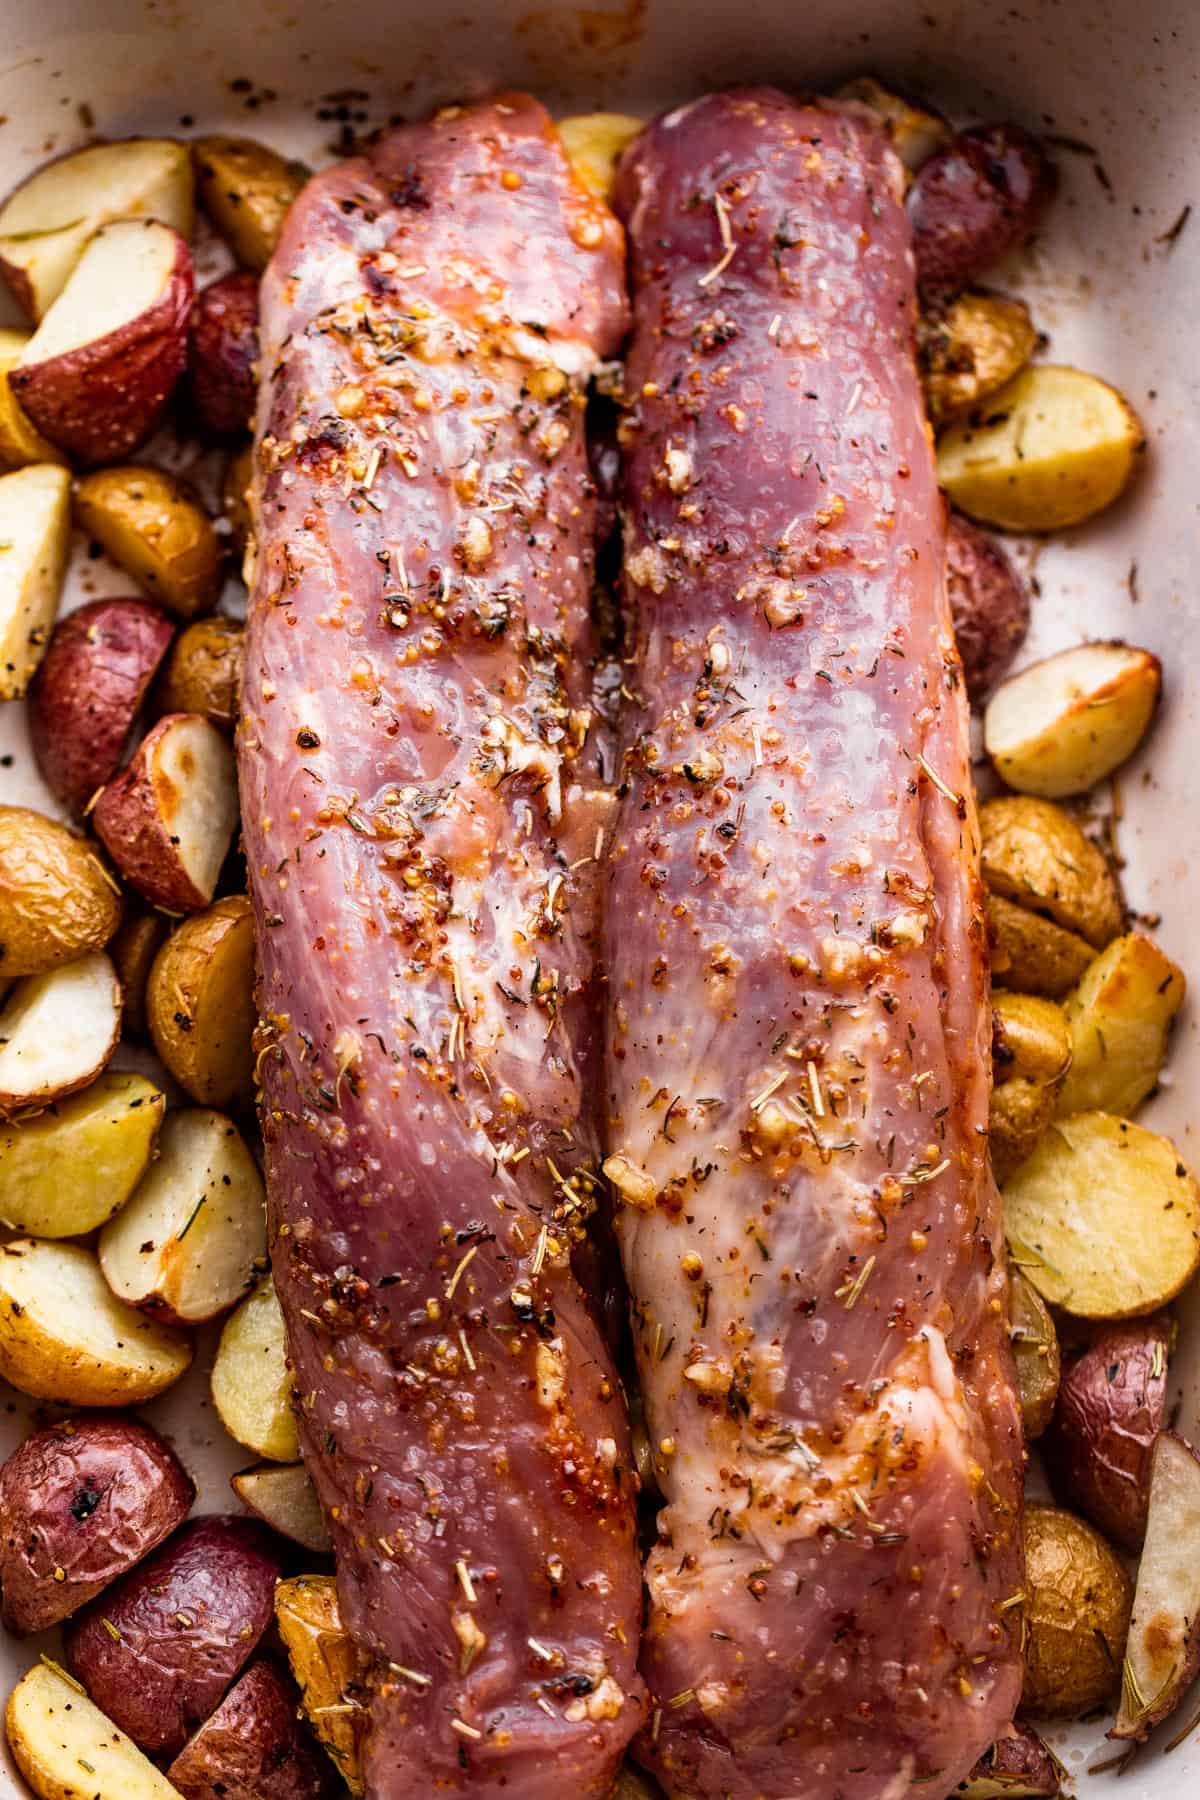 two raw pork tenderloins set over a bed of baby potatoes.